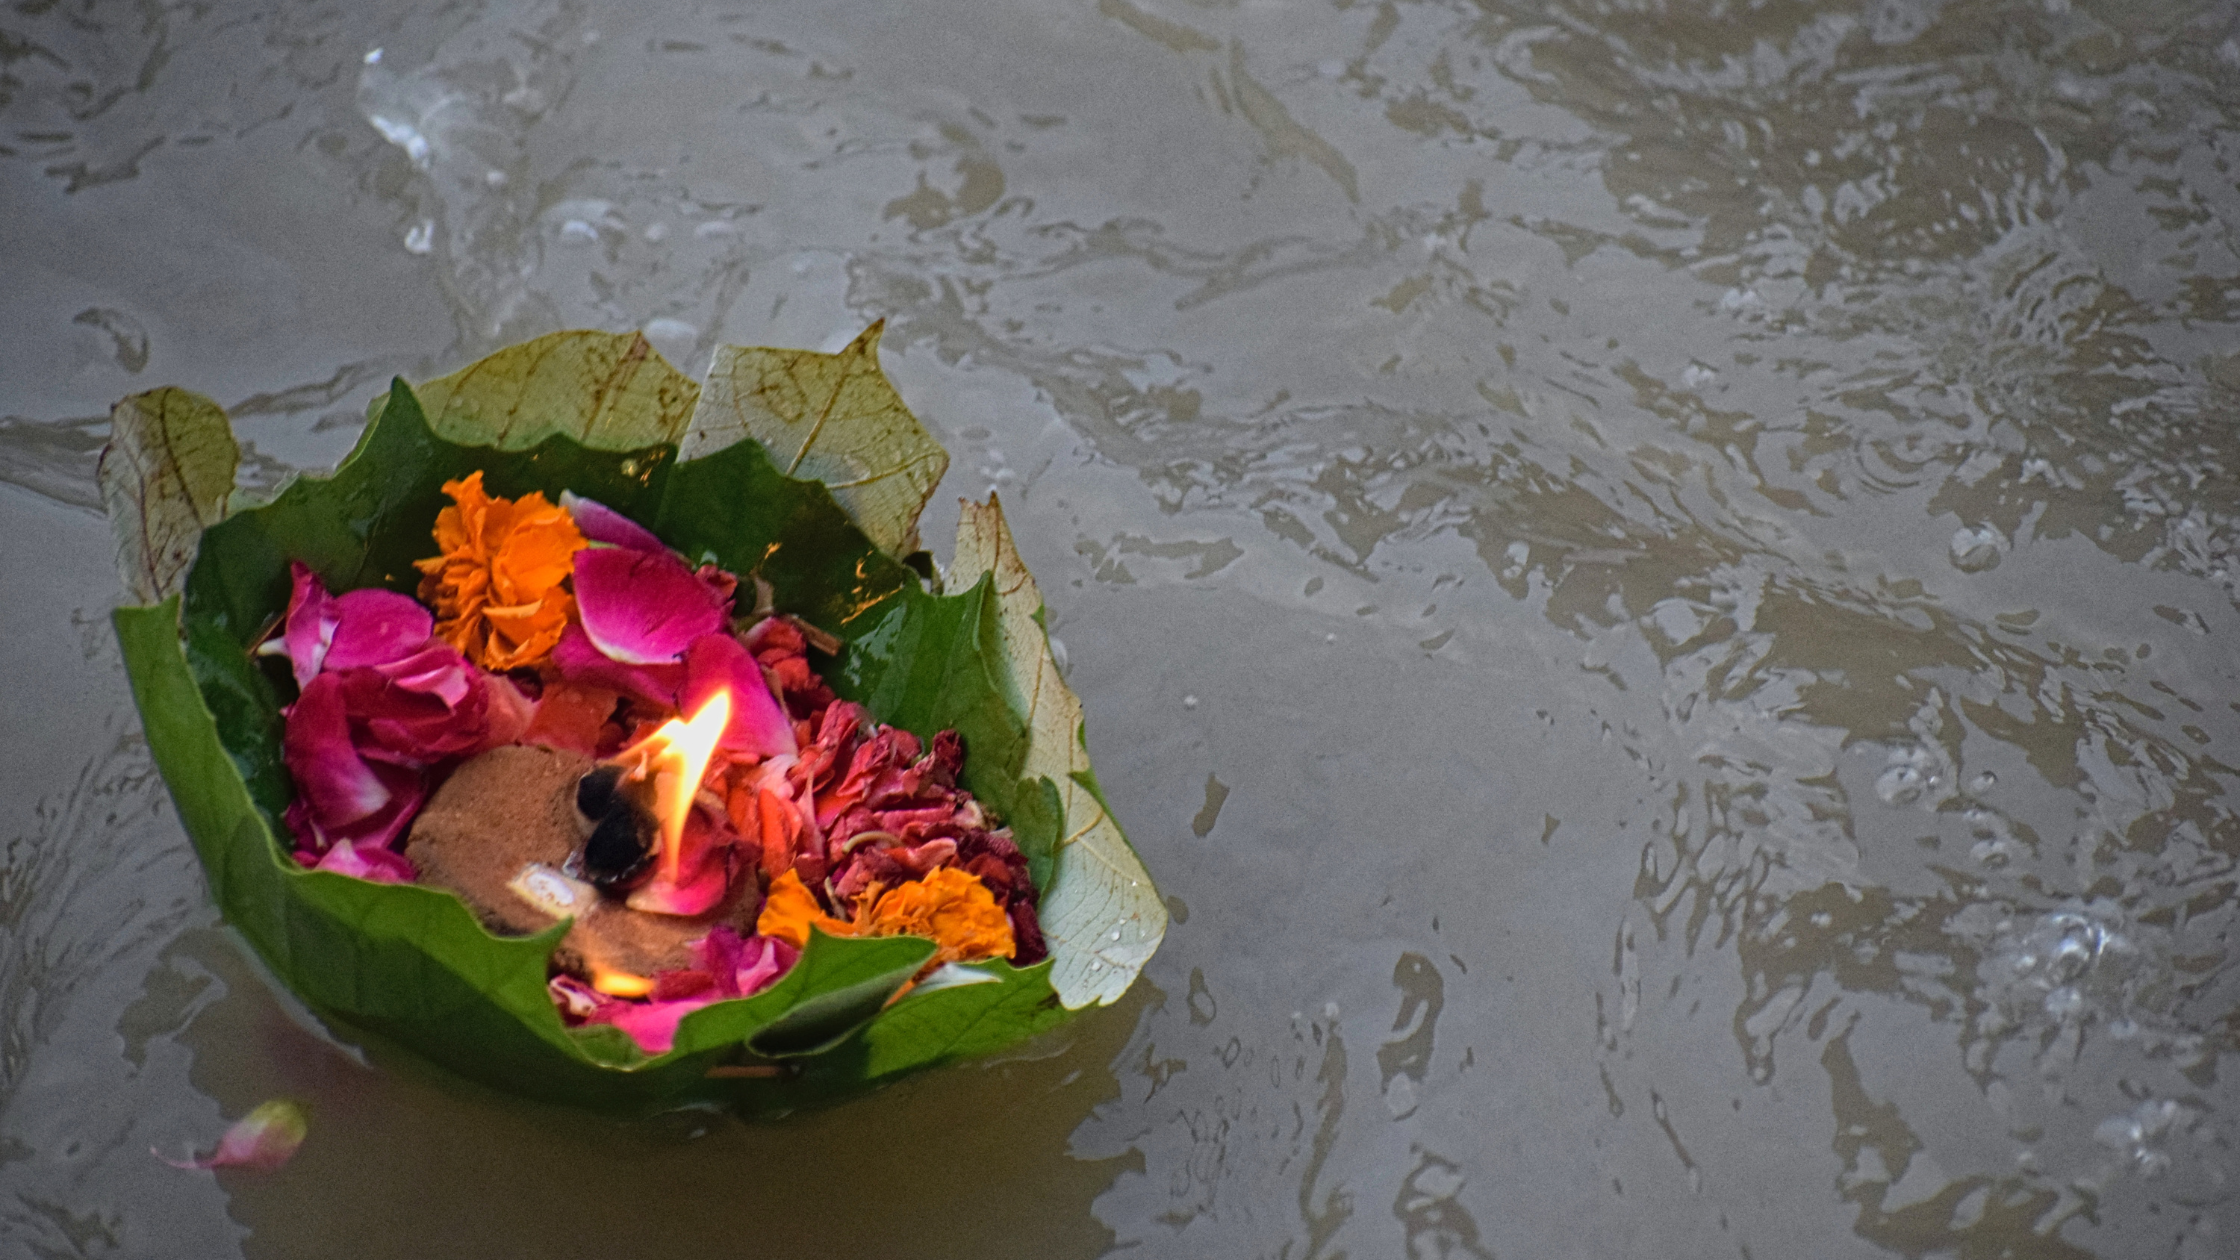 The Sacred Flow: Exploring the Significance of Water through Apah Suktam in Vedic Wisdom